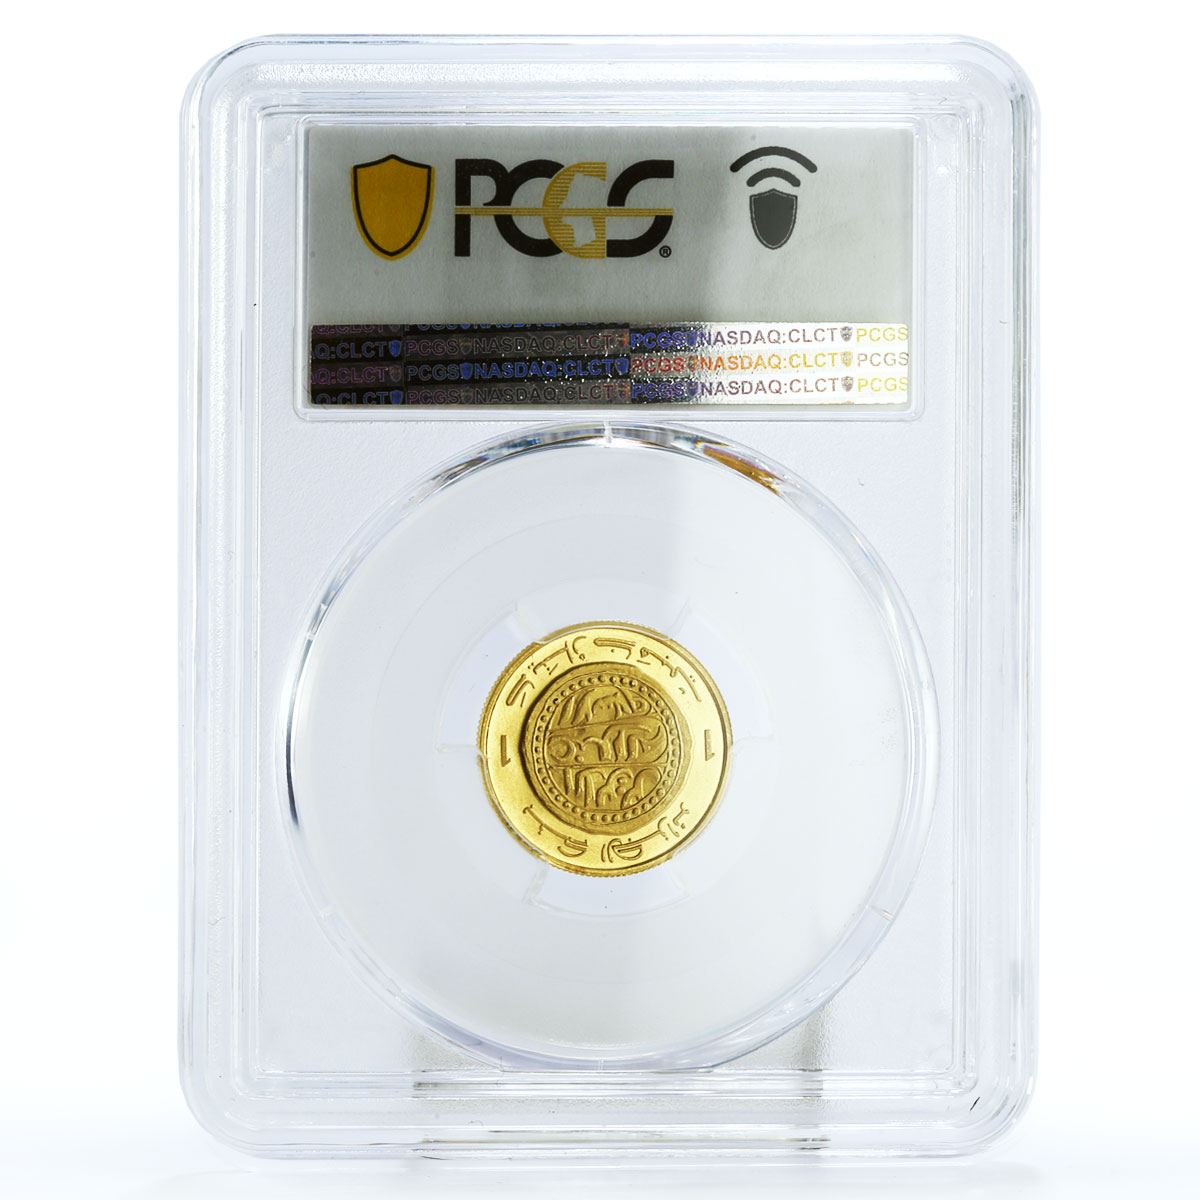 Algeria 1 dinar Old Islamic Coinage Ornaments MS70 PCGS gold coin 1991